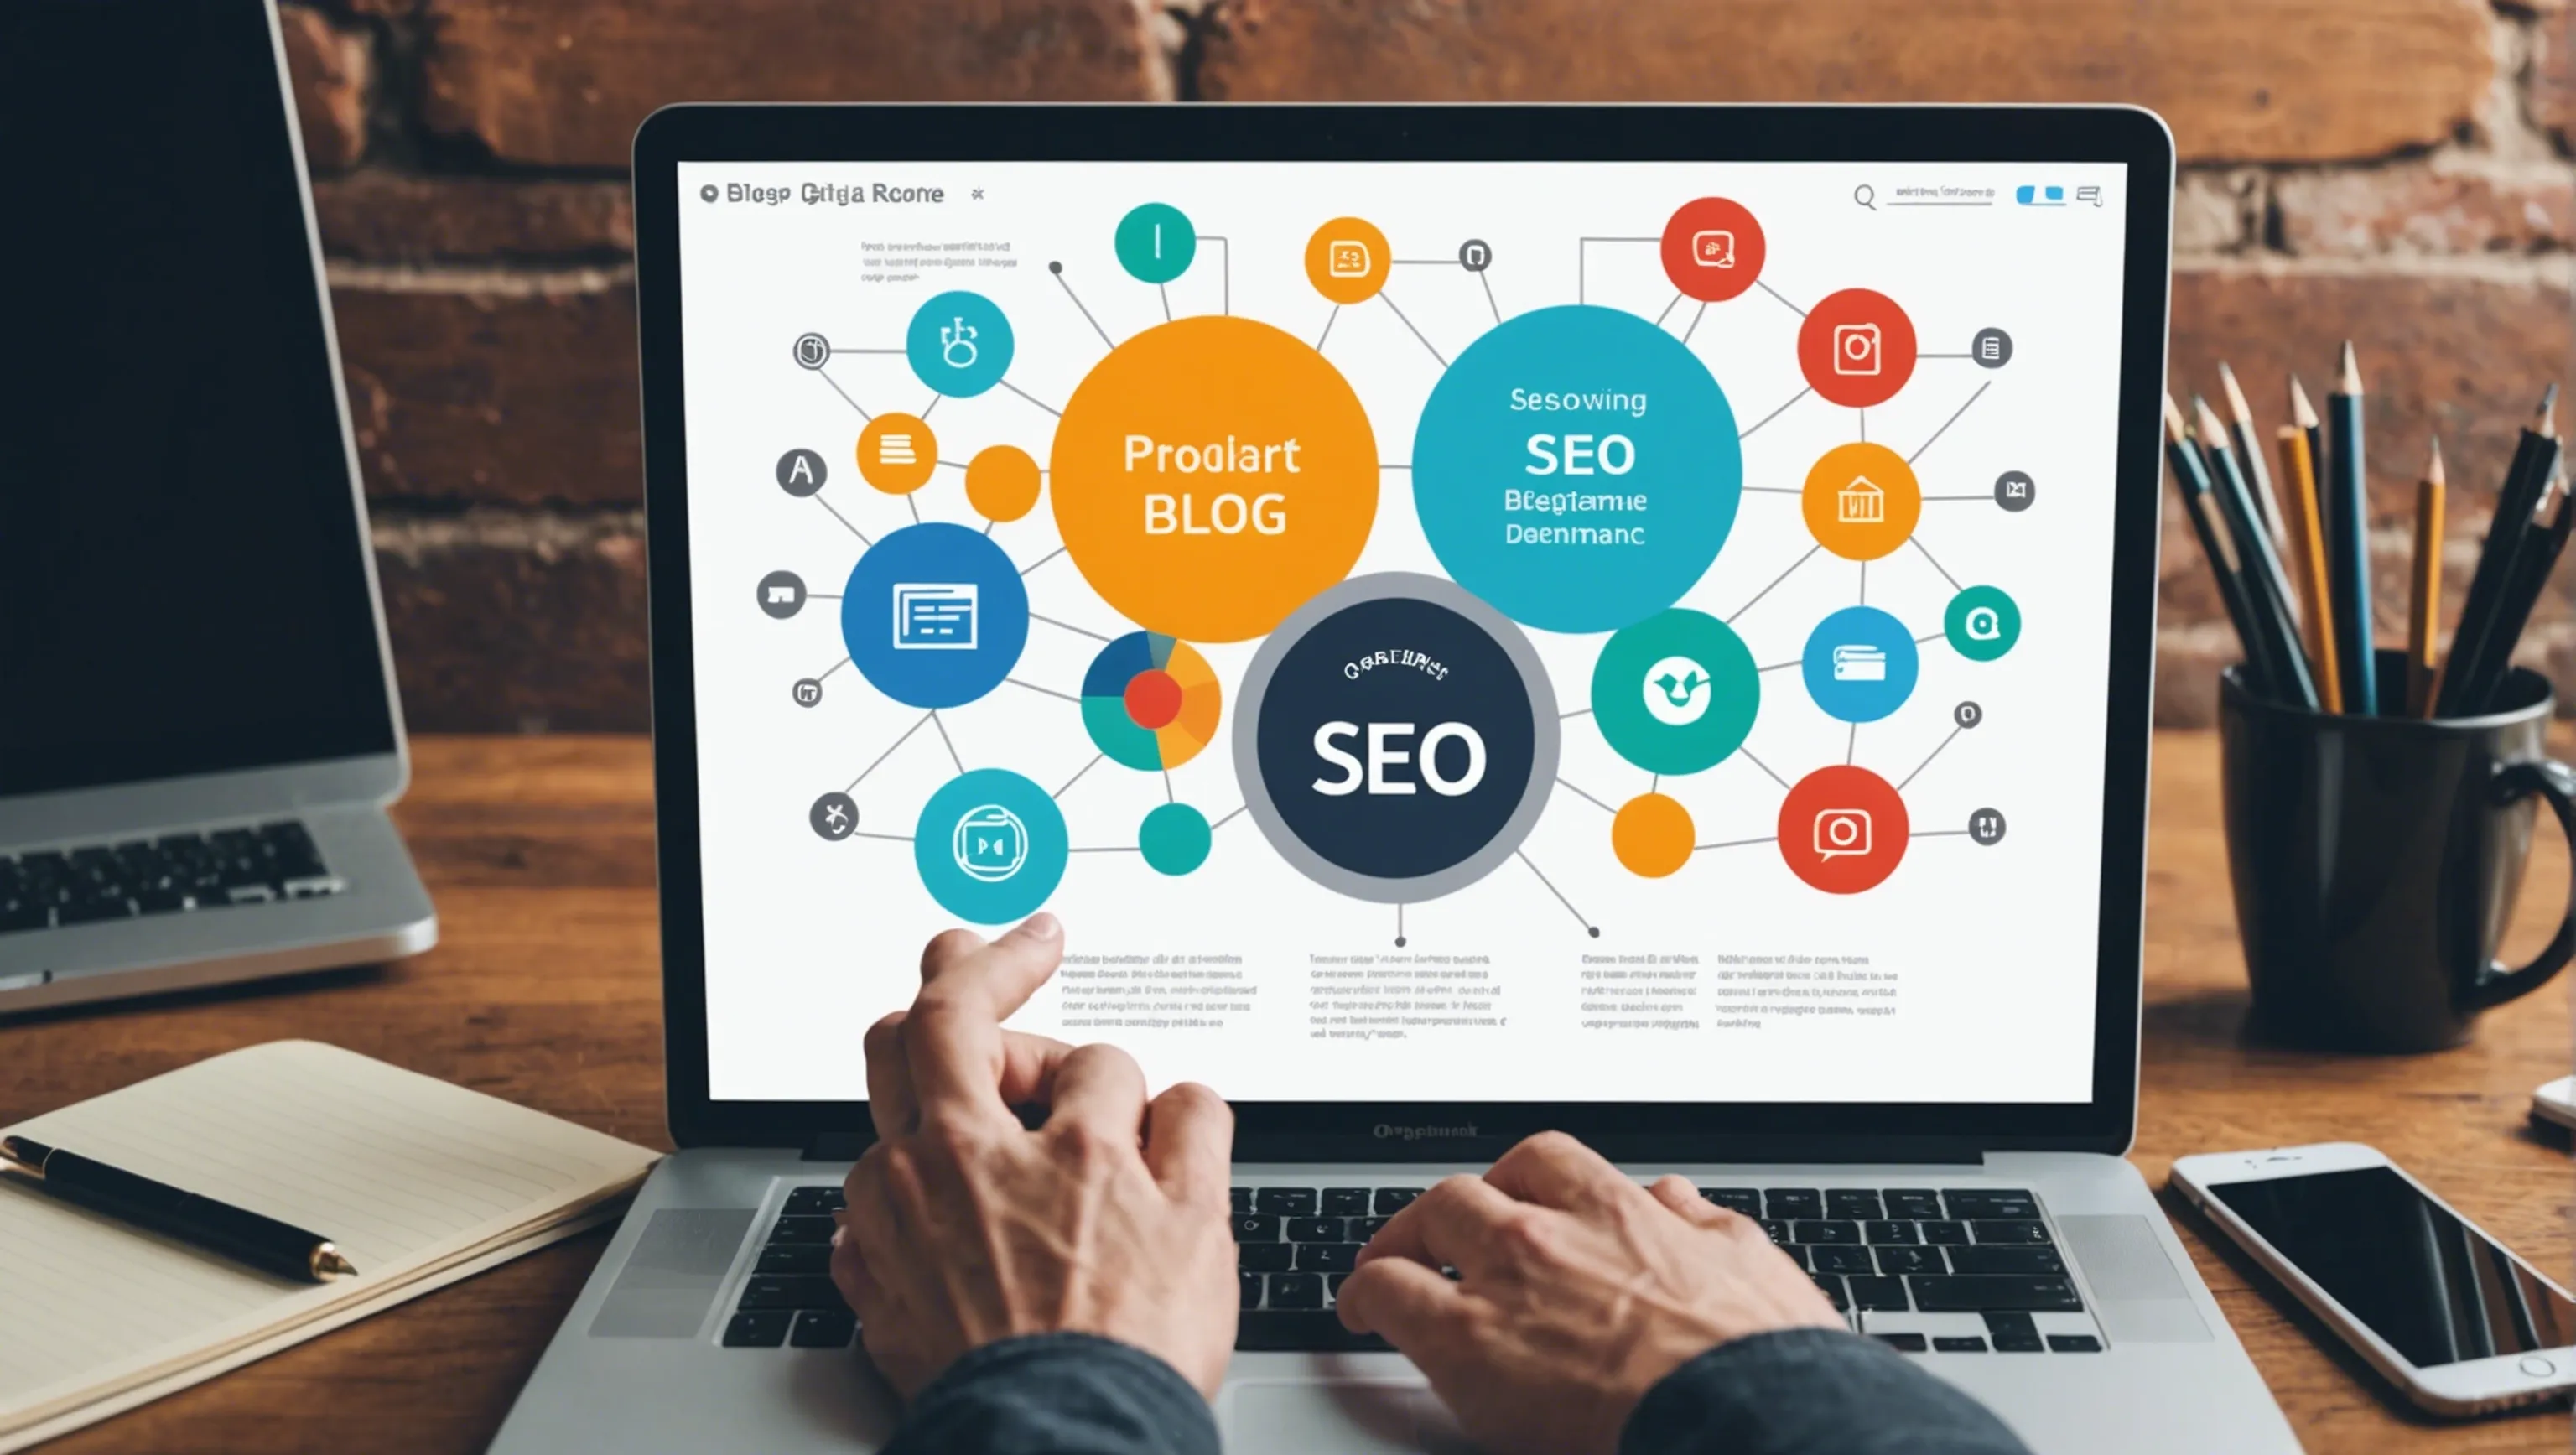 Improving SEO performance for blog content